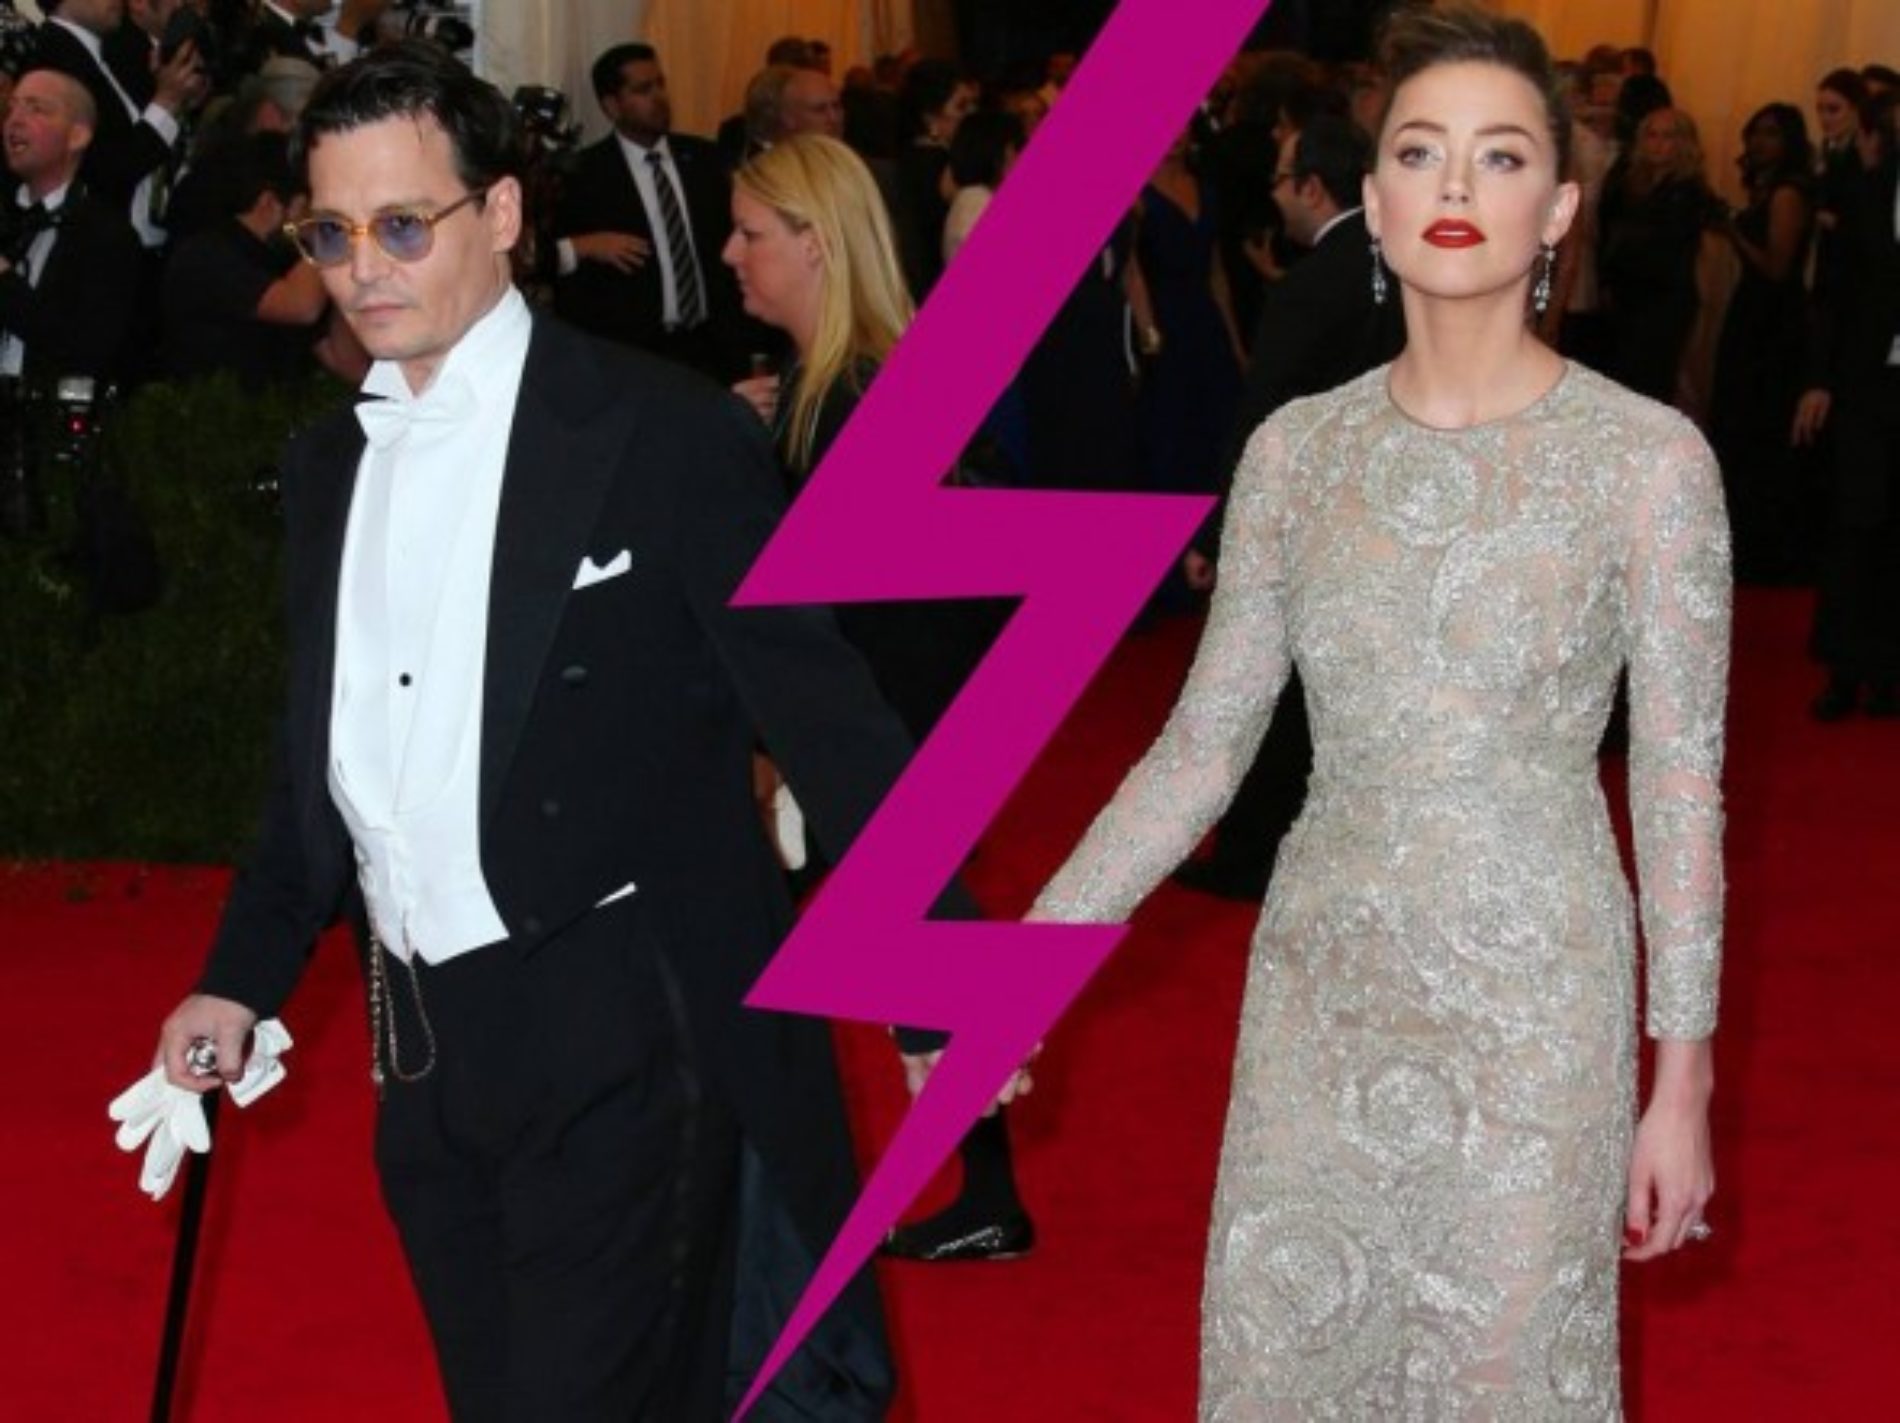 Bisexual actress Amber Heard denies blackmailing Johnny Depp in ongoing divorce